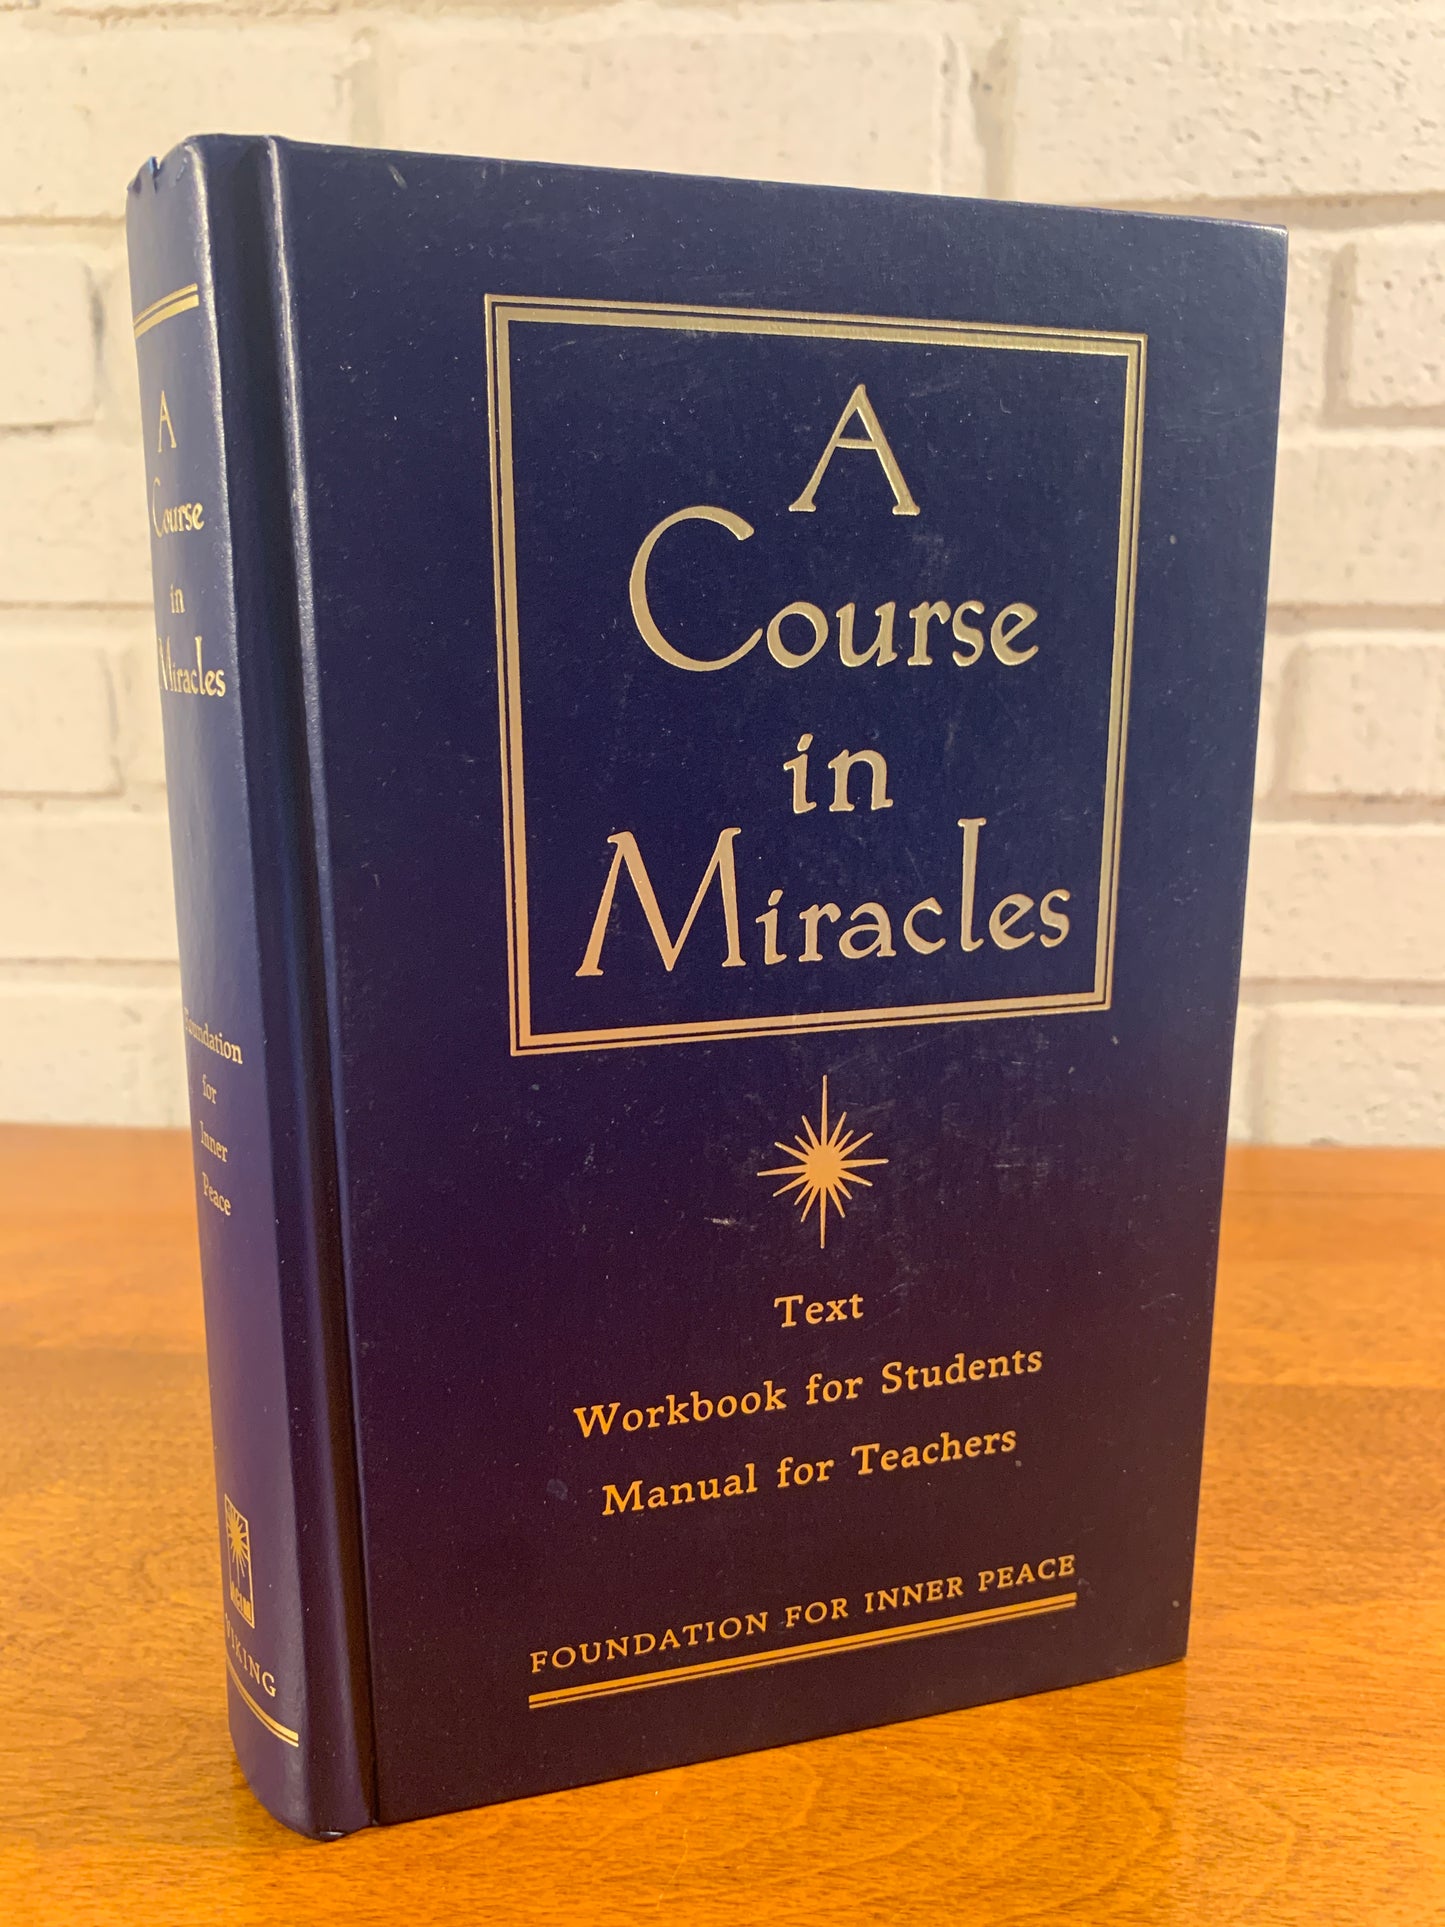 A Course in Miracles: Workbook for Students, Manual for Teachers 1996